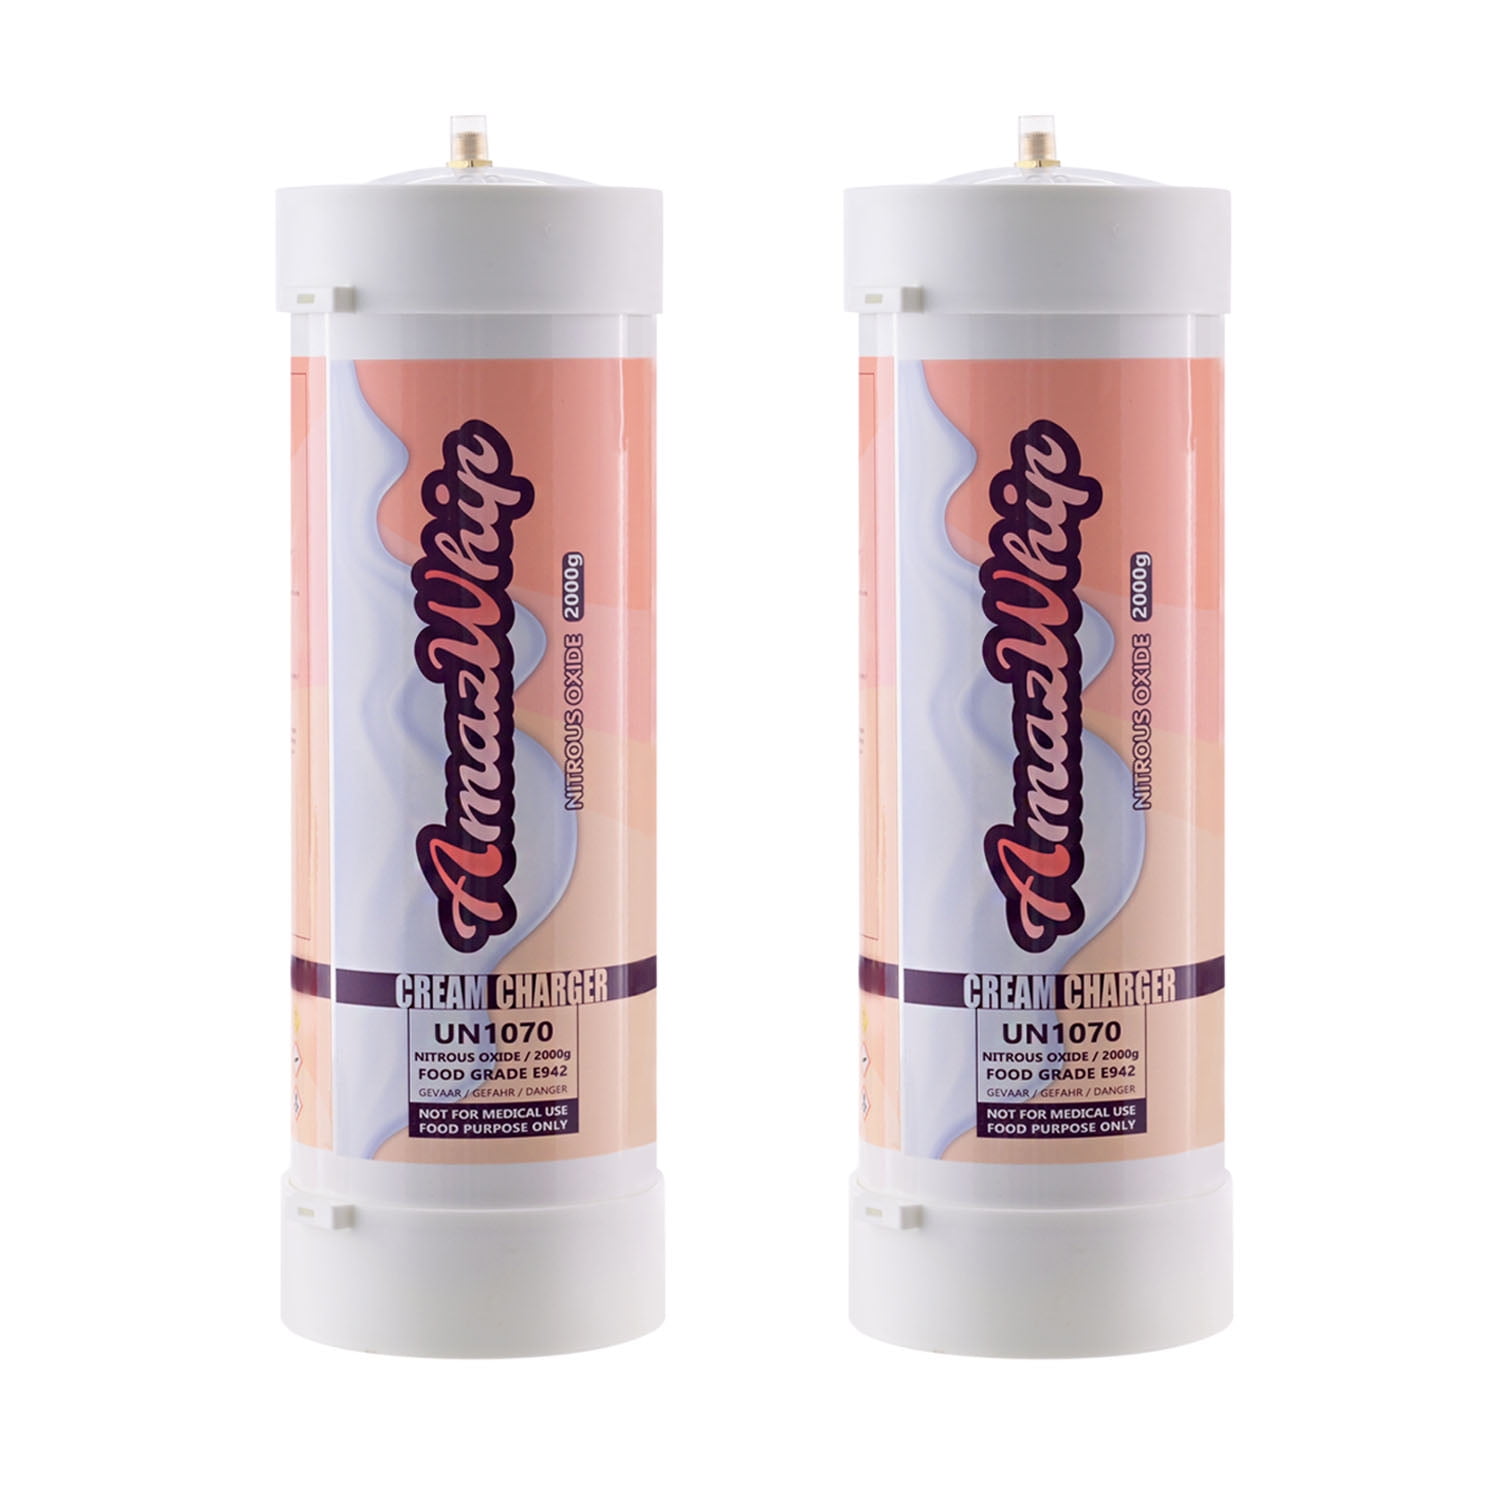 AmazWhip 2000G Whipped Cream Charger, 3.3L Cream Charger Tanks (2  Cylinders) 